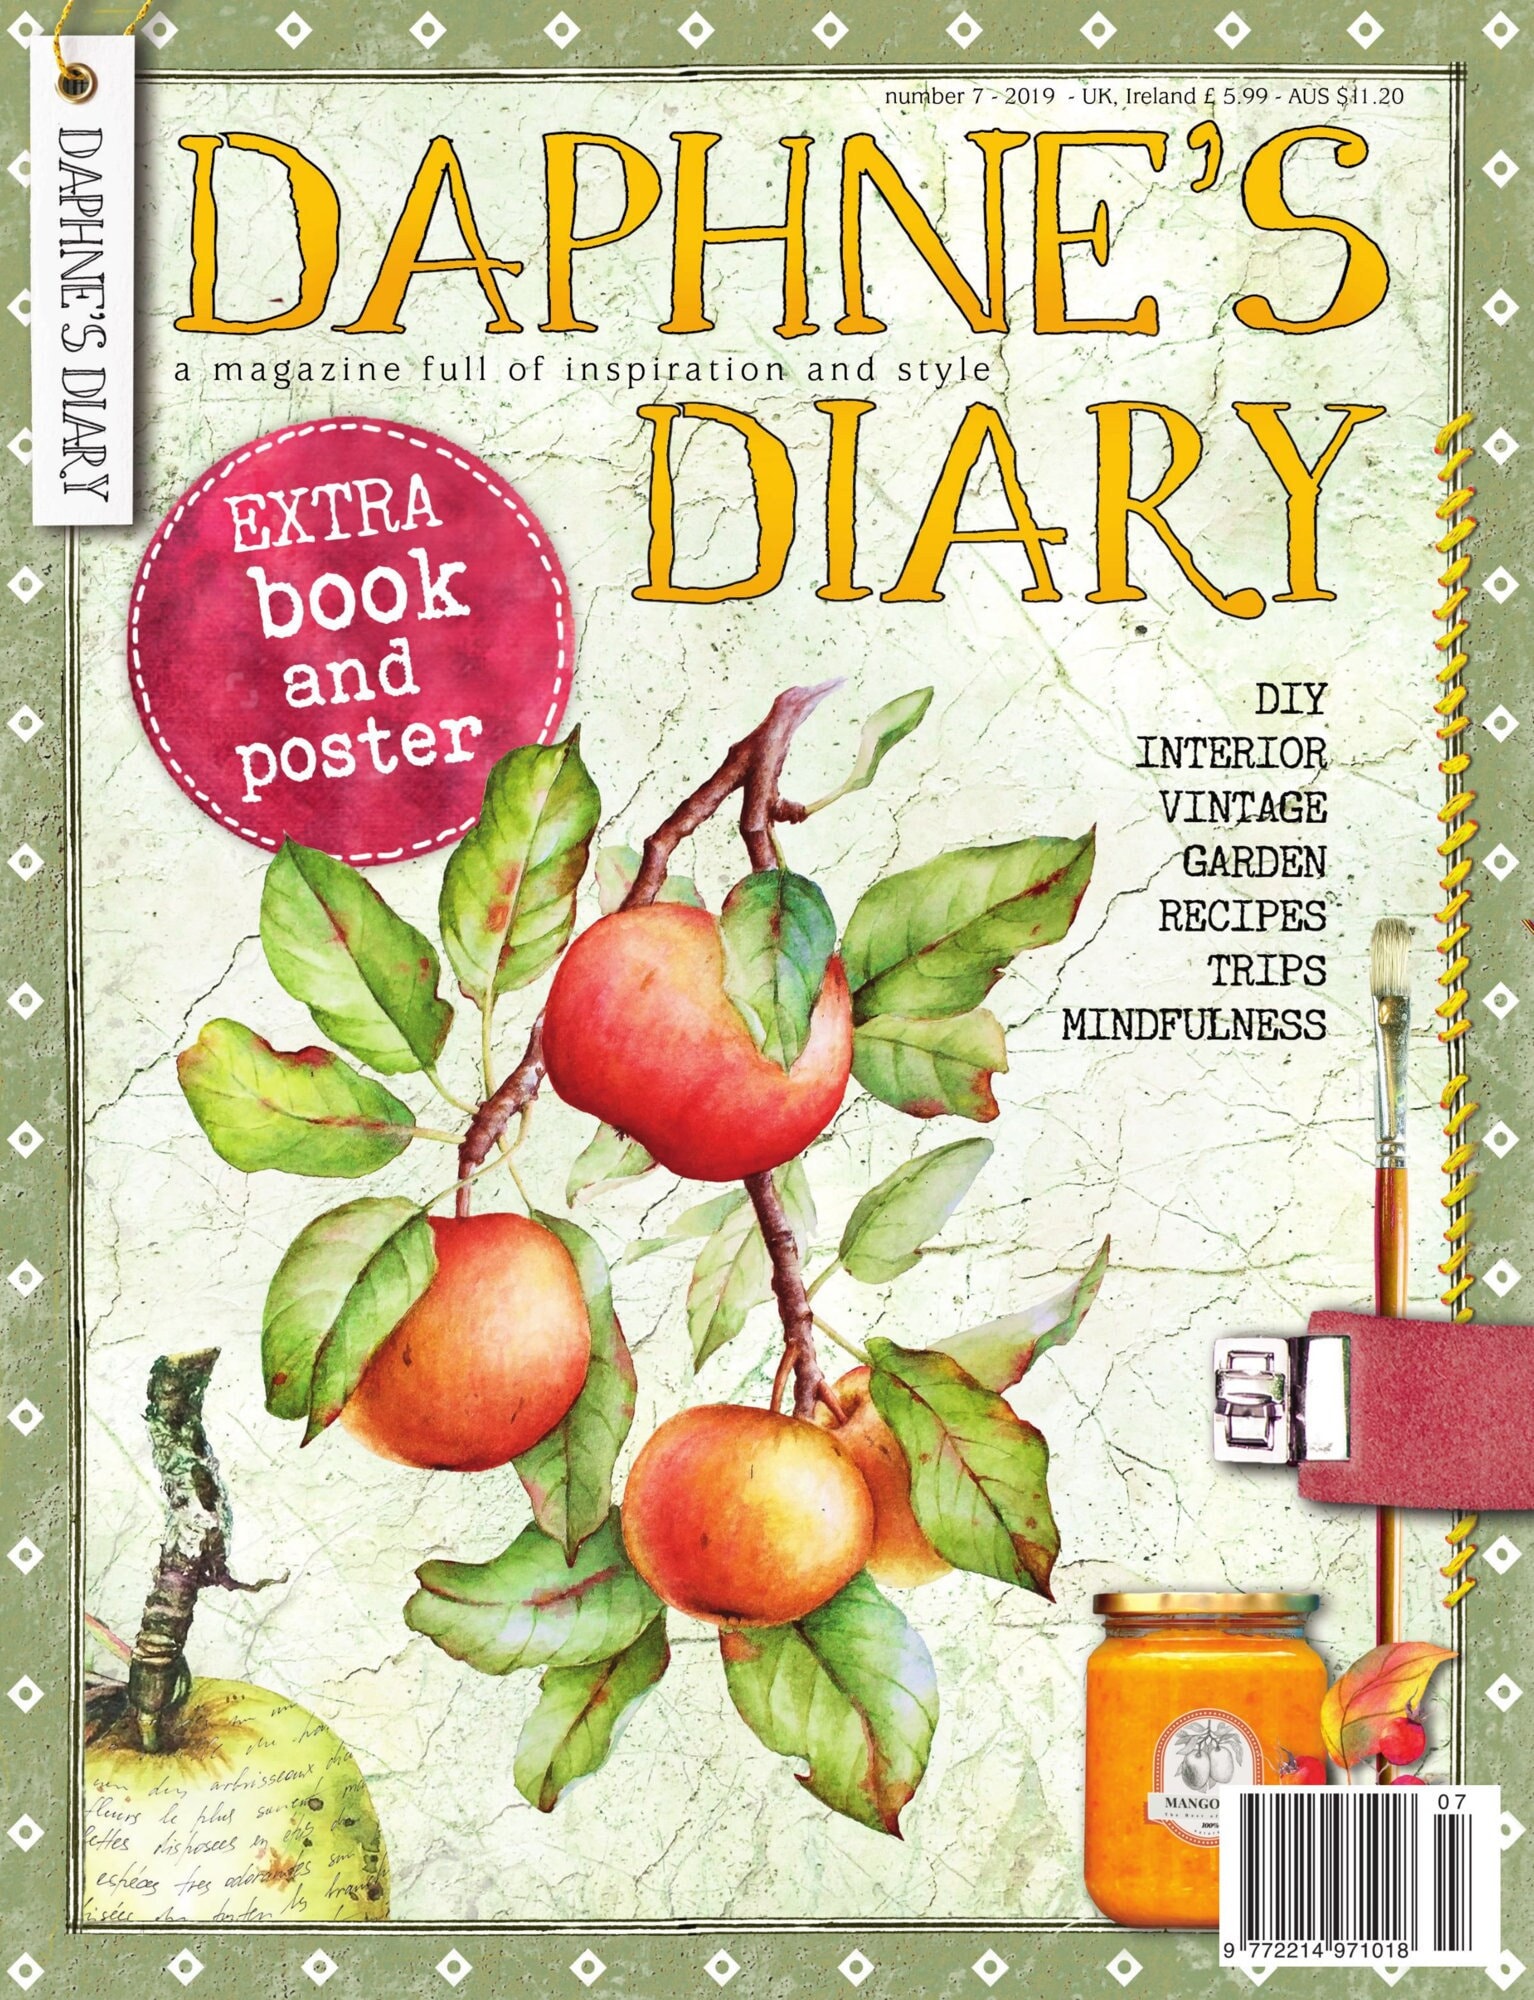 Daphnes Diary English Edition Issue 07, 2019 Extra Book and Poster